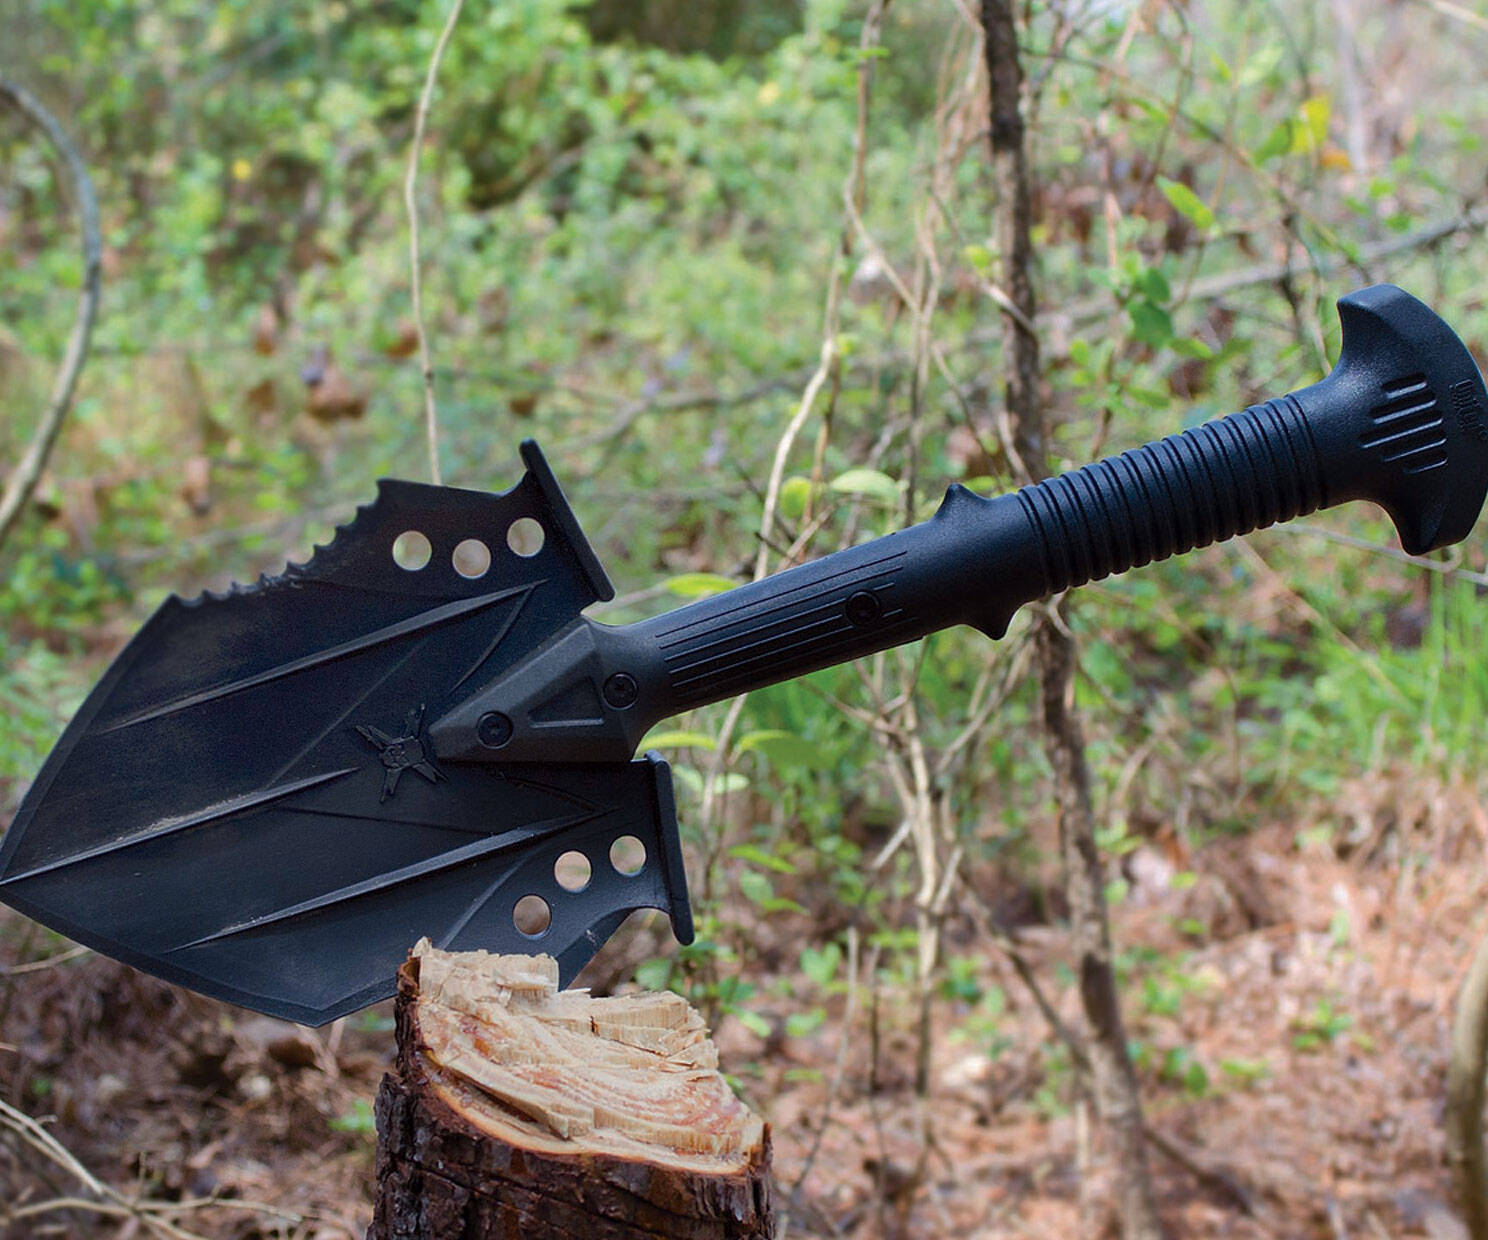 Tactical Survival Shovel - coolthings.us